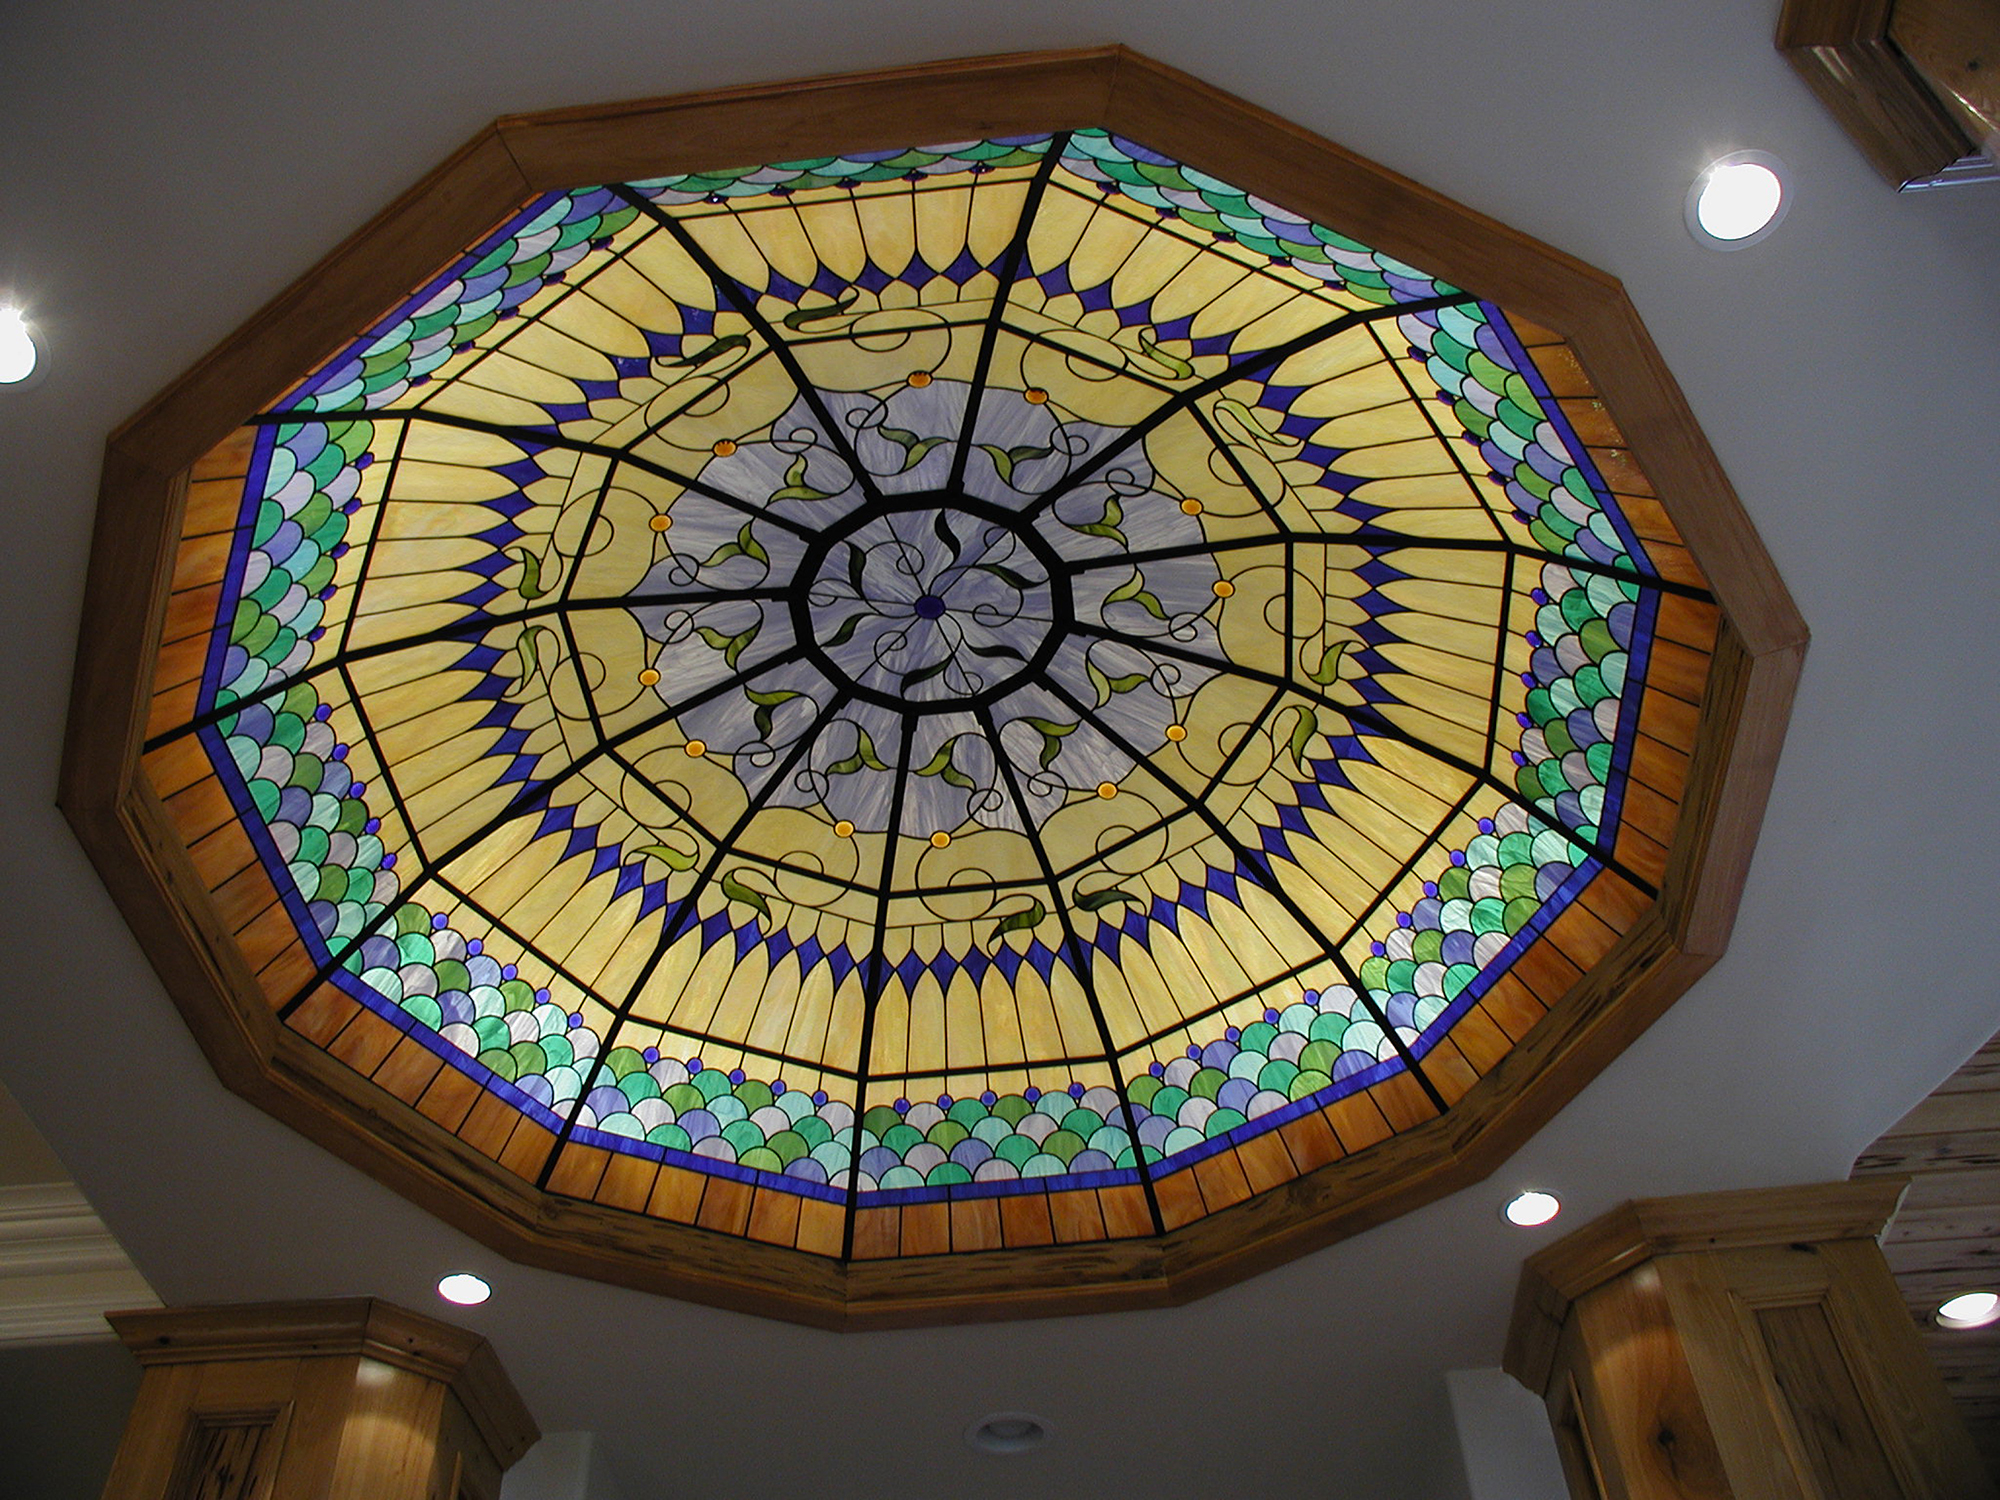 Ceiling dome with yellow, blue, green, and brown glass in a Traditional style.